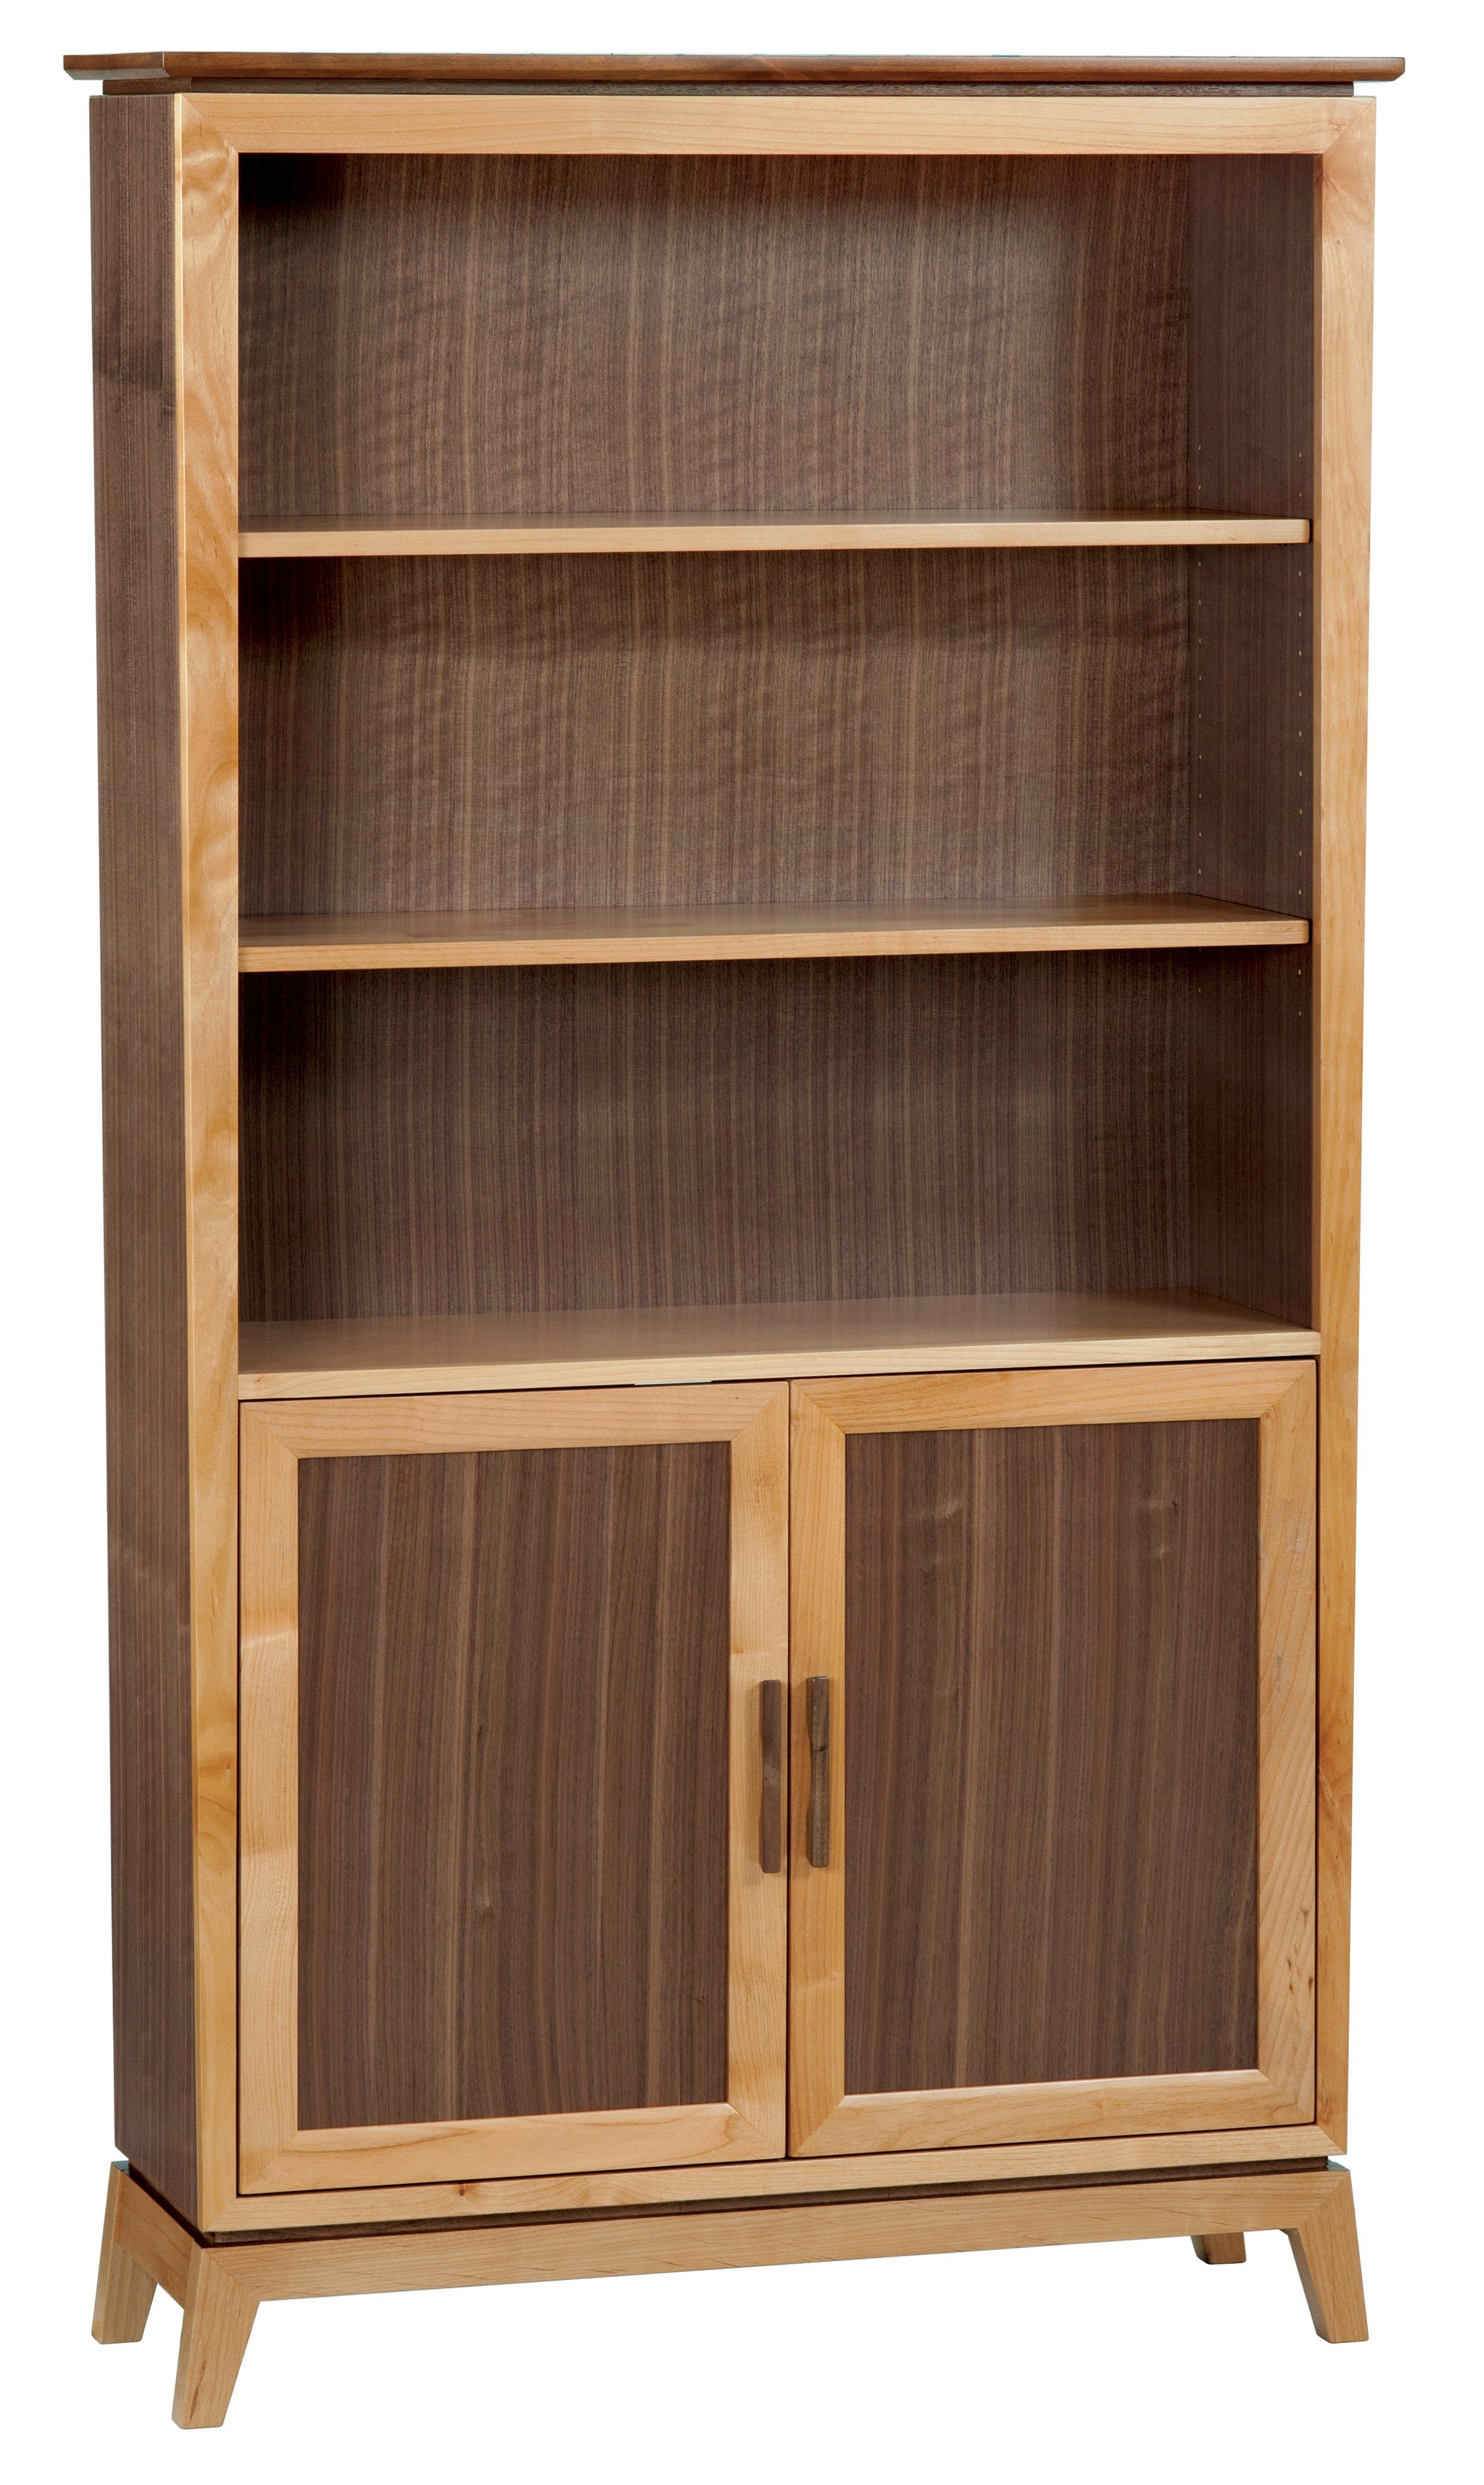 Addison 72" Bookcase with Doors